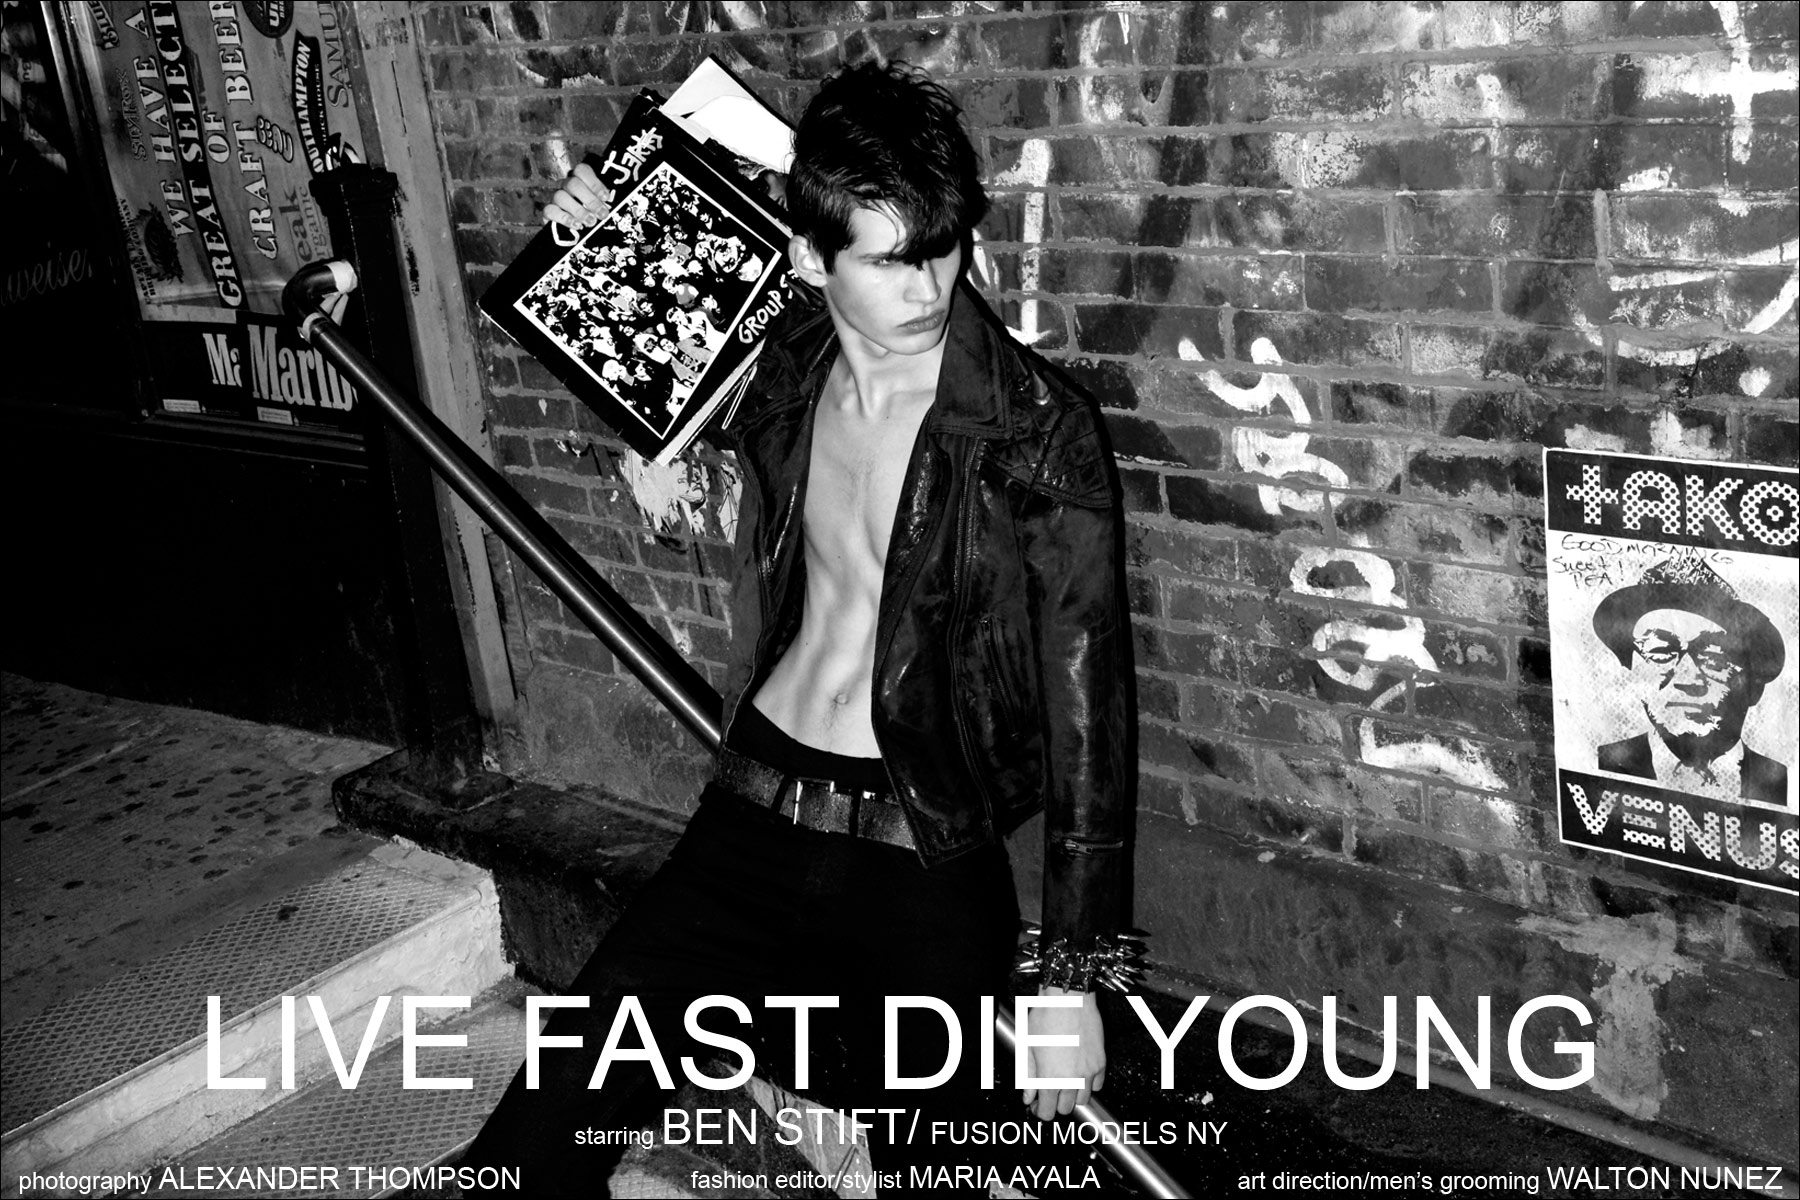 "Live Fast Die Young", a men's punk editorial for Ponyboy Magazine, starring Fusion male model Ben Stift. Photographed by Alexander Thompson in New York City.